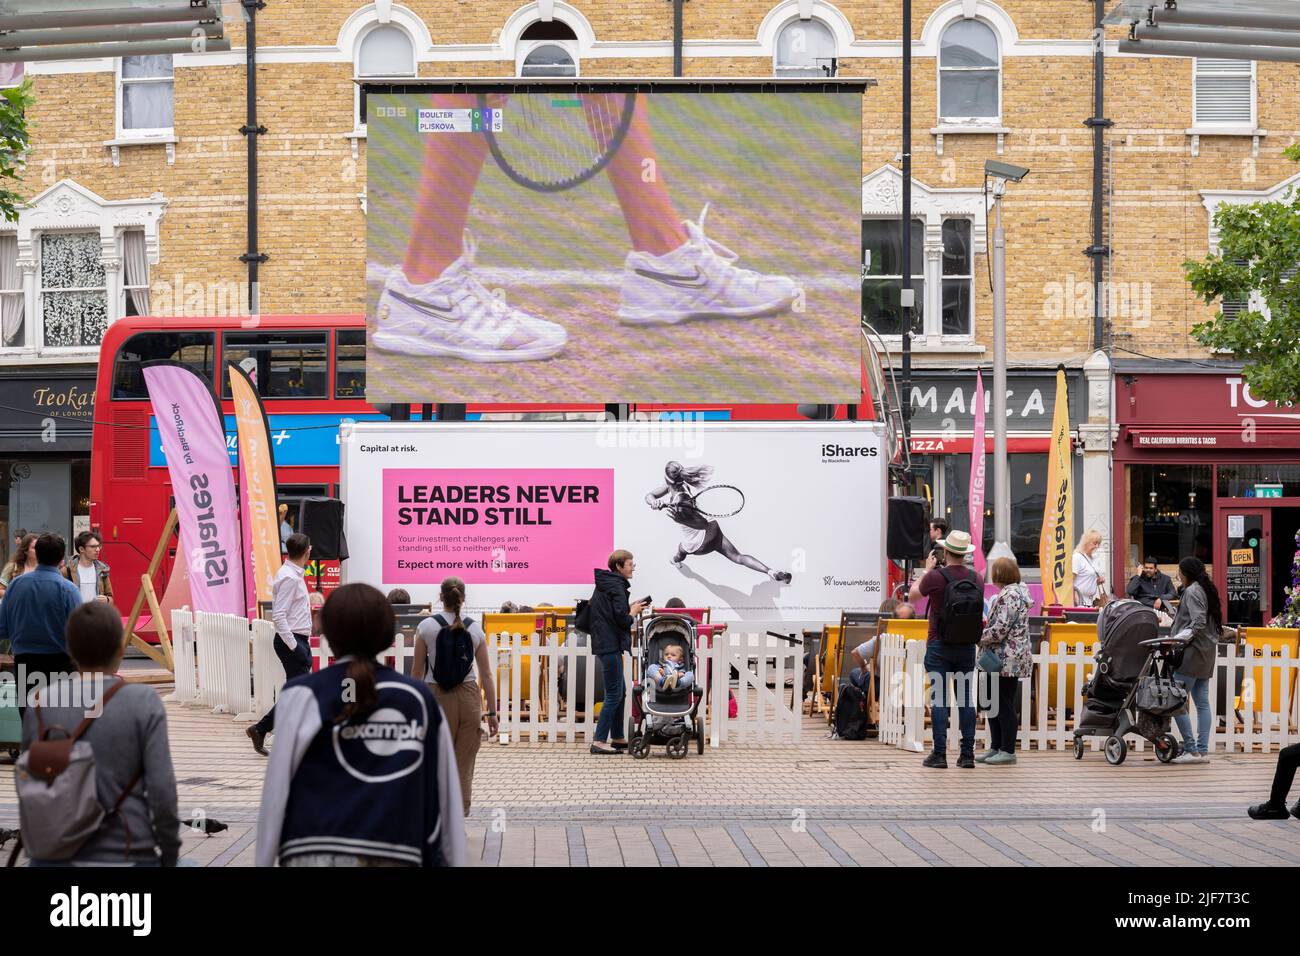 A live feed of a tennis match between Katie Boulter and Karolina Pliskova is being watched by south Londoners in Wimbledon town centre during the Lawn Tennis Association's two-week championships, on 30th June 2022, in London, England. Stock Photo